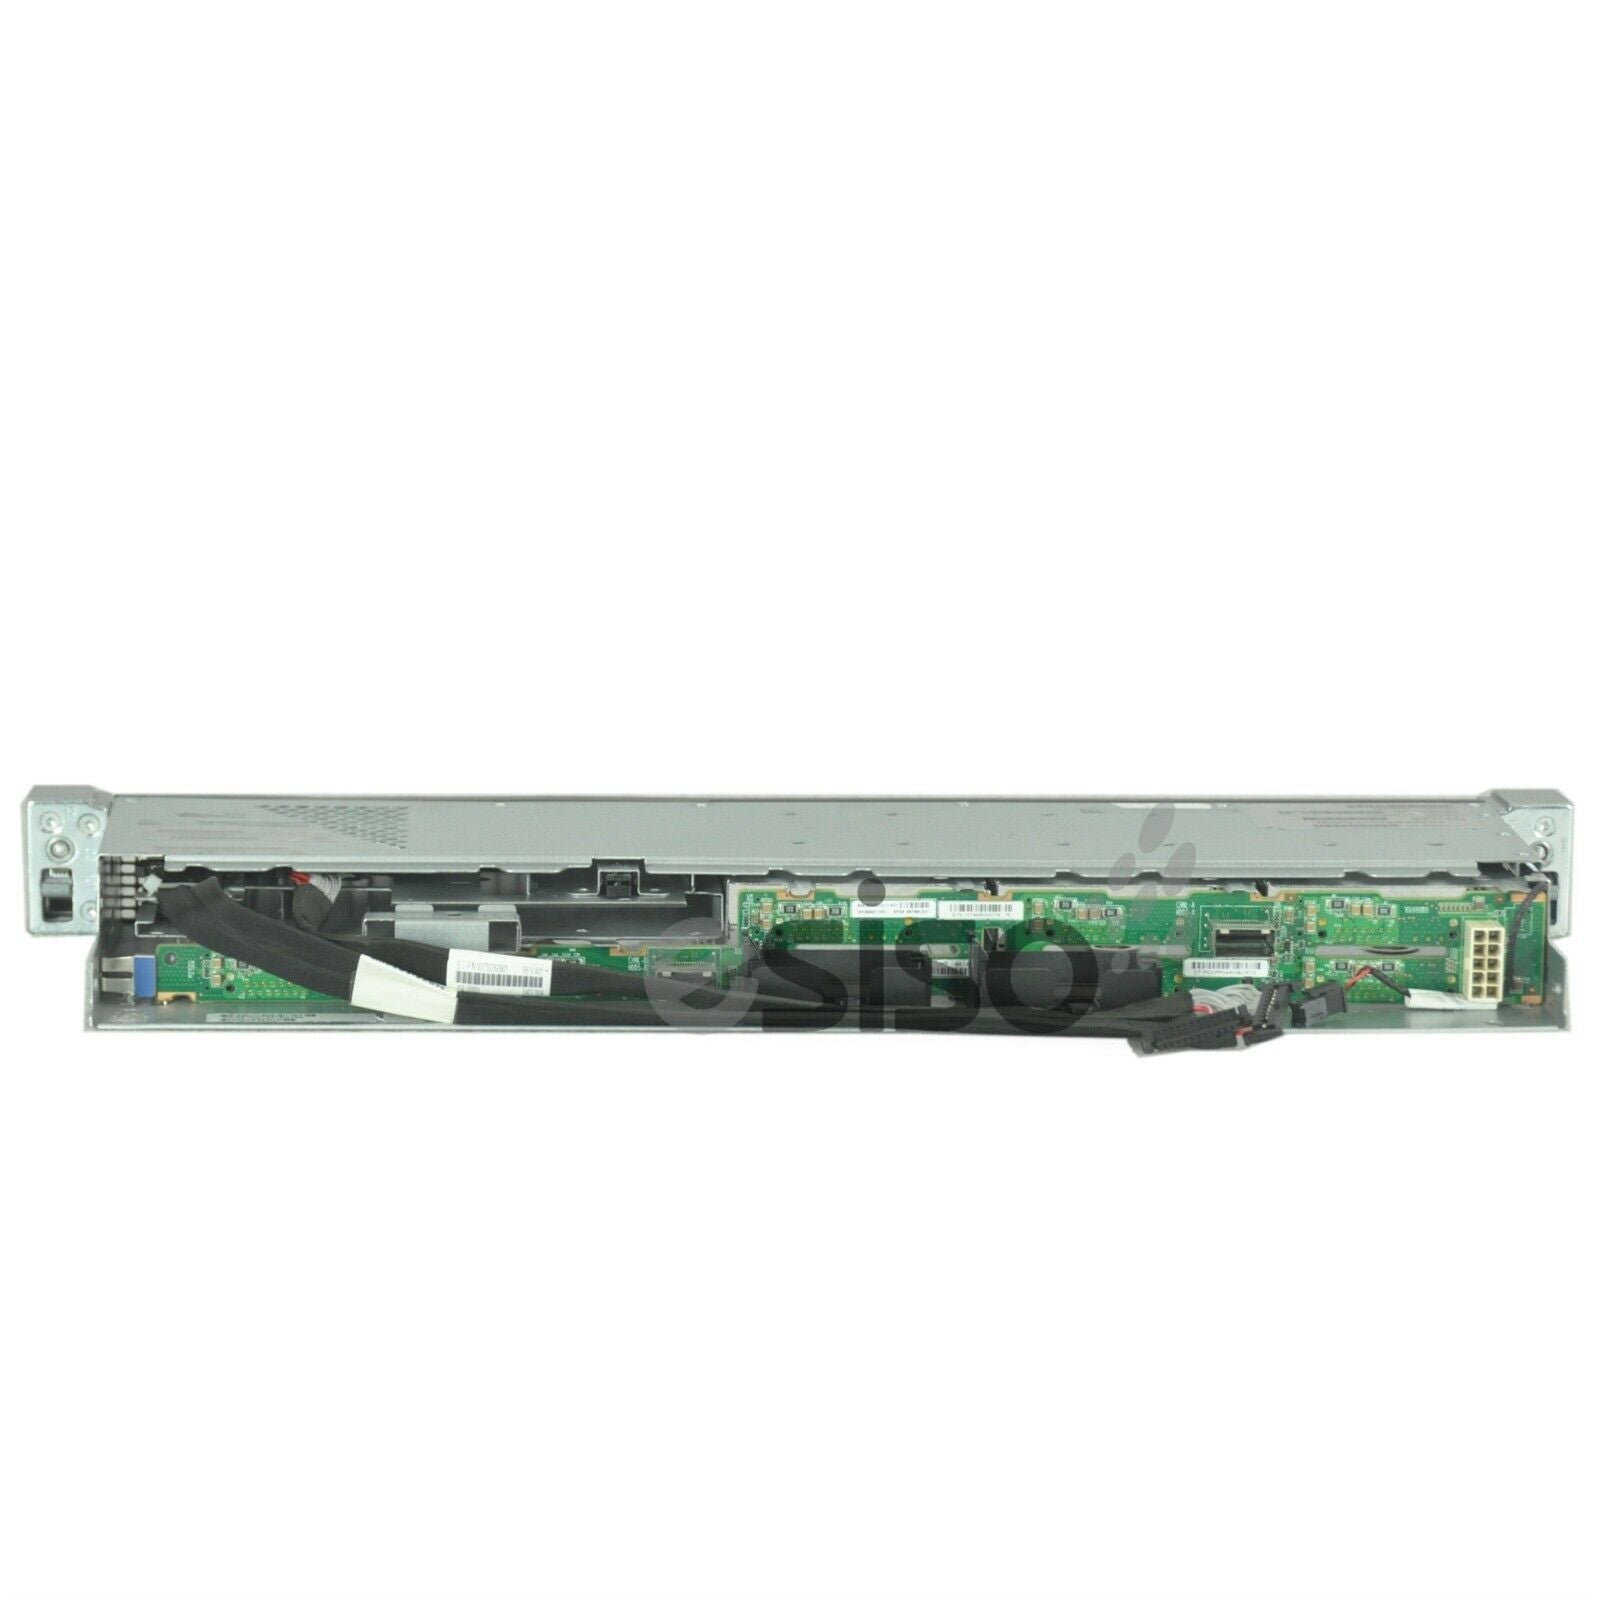 668240-001 HP 8 SFF HDD CAGE W/ BACKPLANE & 2x SAS CABLES FOR PROLIANT DL360e G8